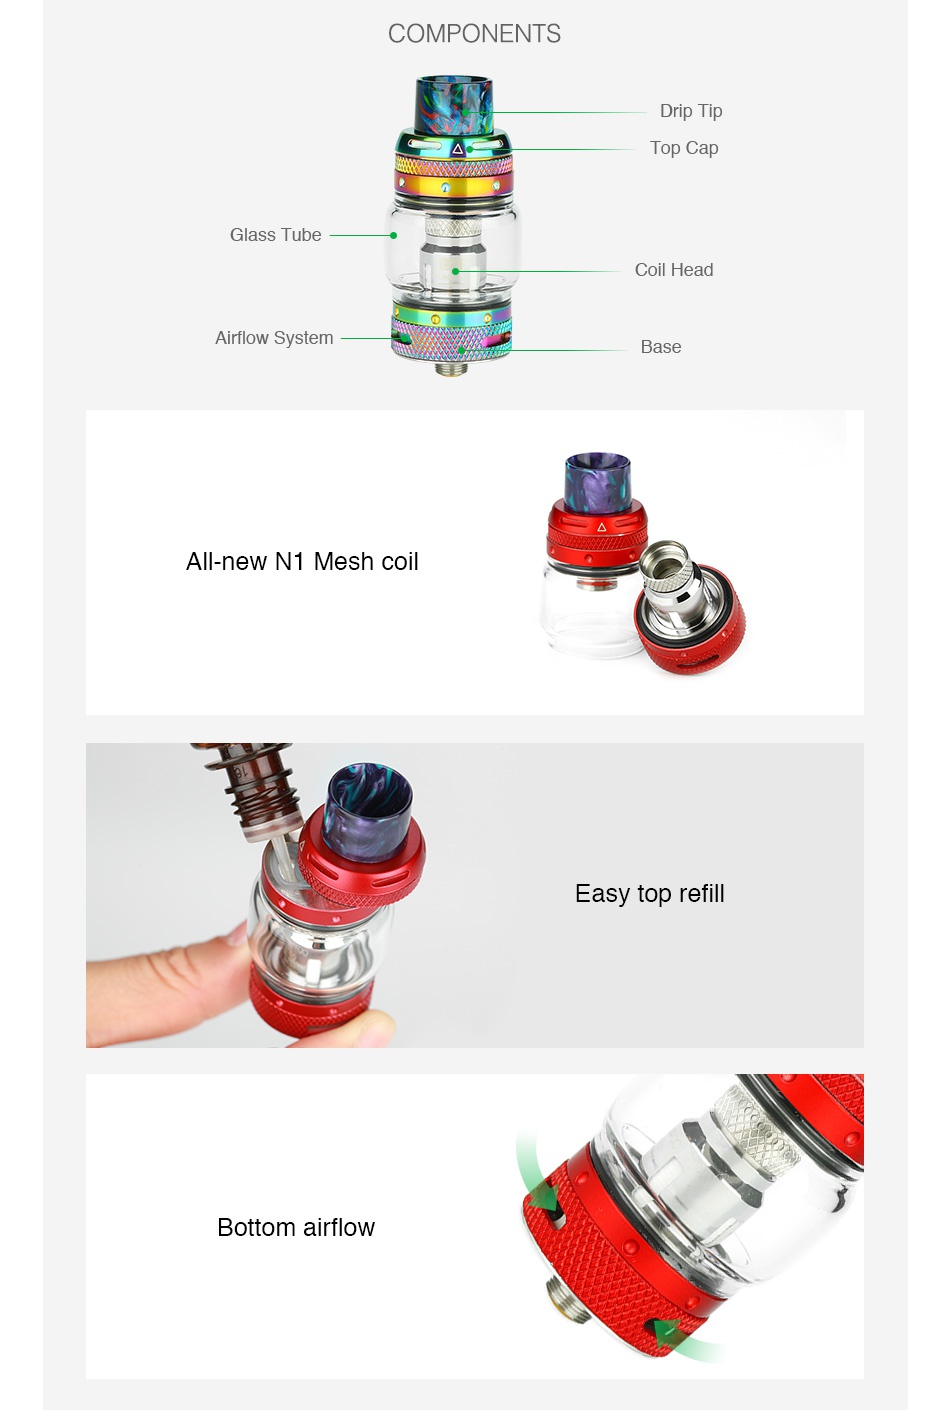 VOOPOO UFORCE T1 Subohm Tank 3.5ml/8ml COMPONENTS Drip I ip Top Cap Glass Tube Coil Head Airflow System All new n1 Mesh co Easy top refill Bottom airflow